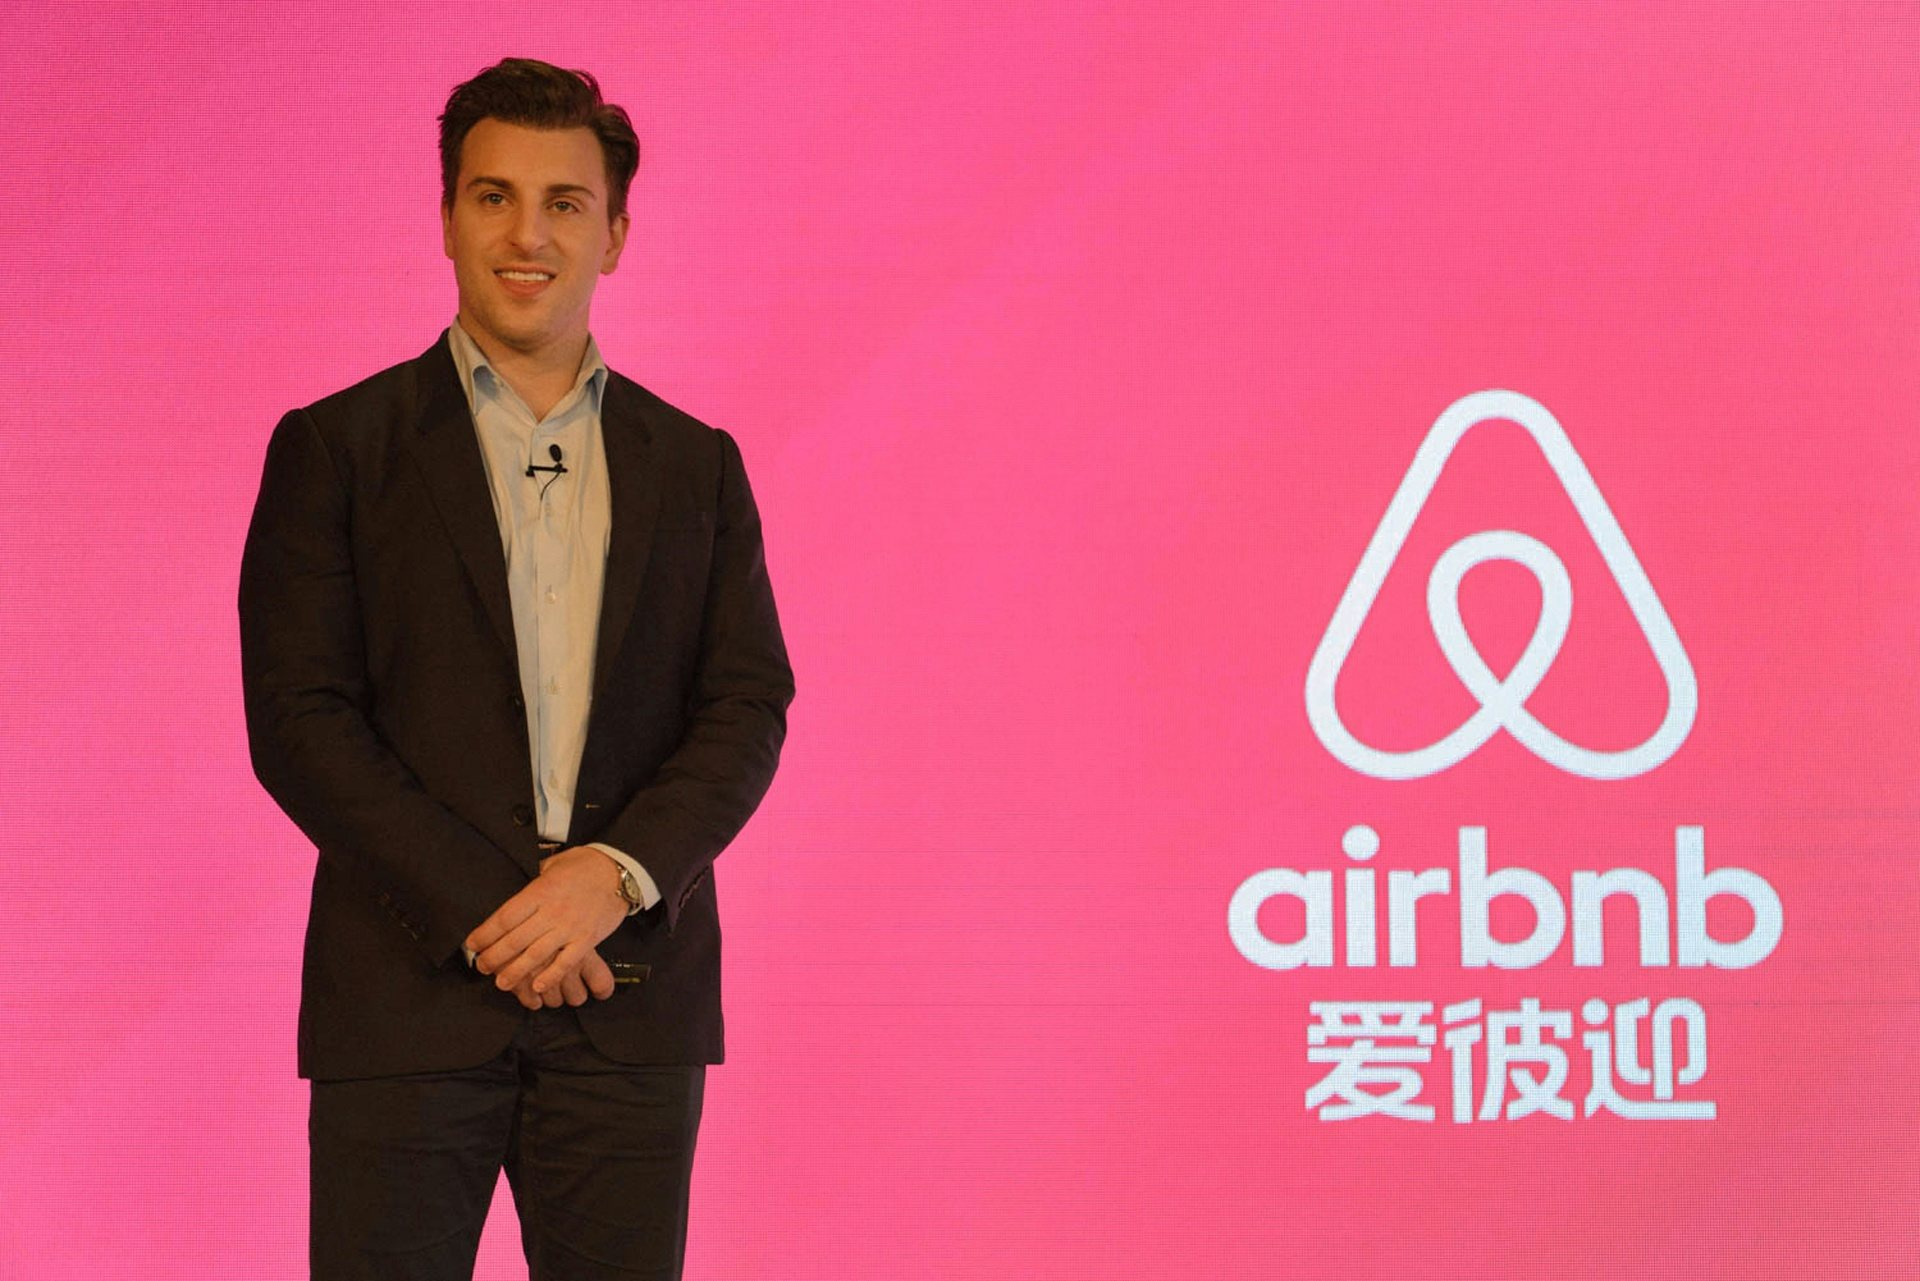 Airbnb CEO Brian Chesky announcing Airbnb's new Chinese brand name. (Courtesy Photo)